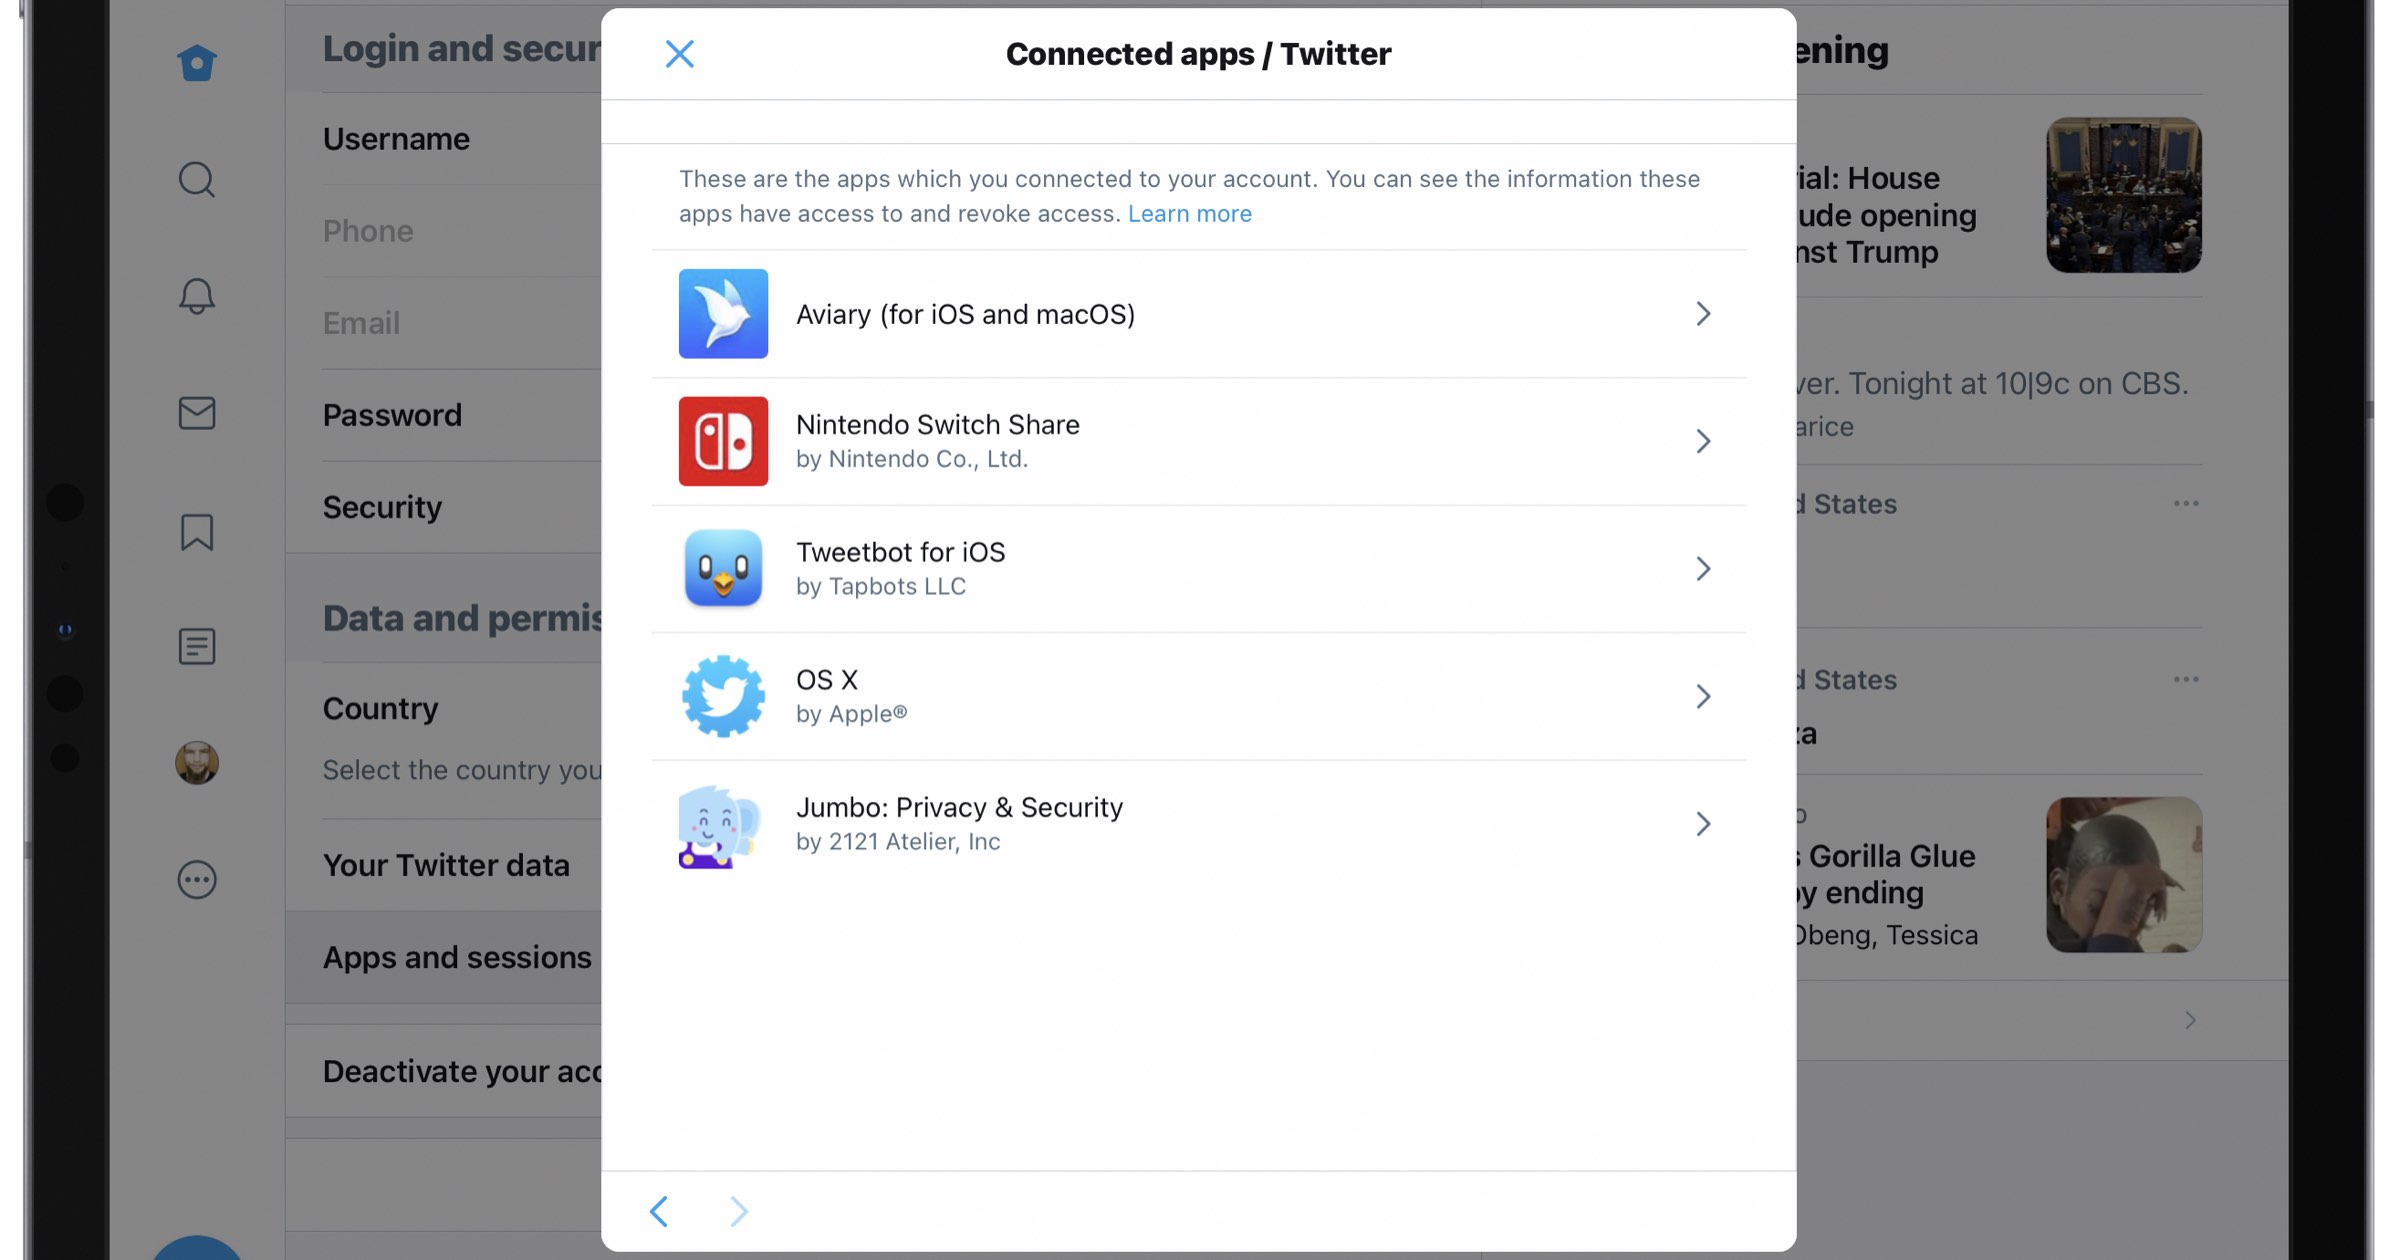 List of connected twitter apps